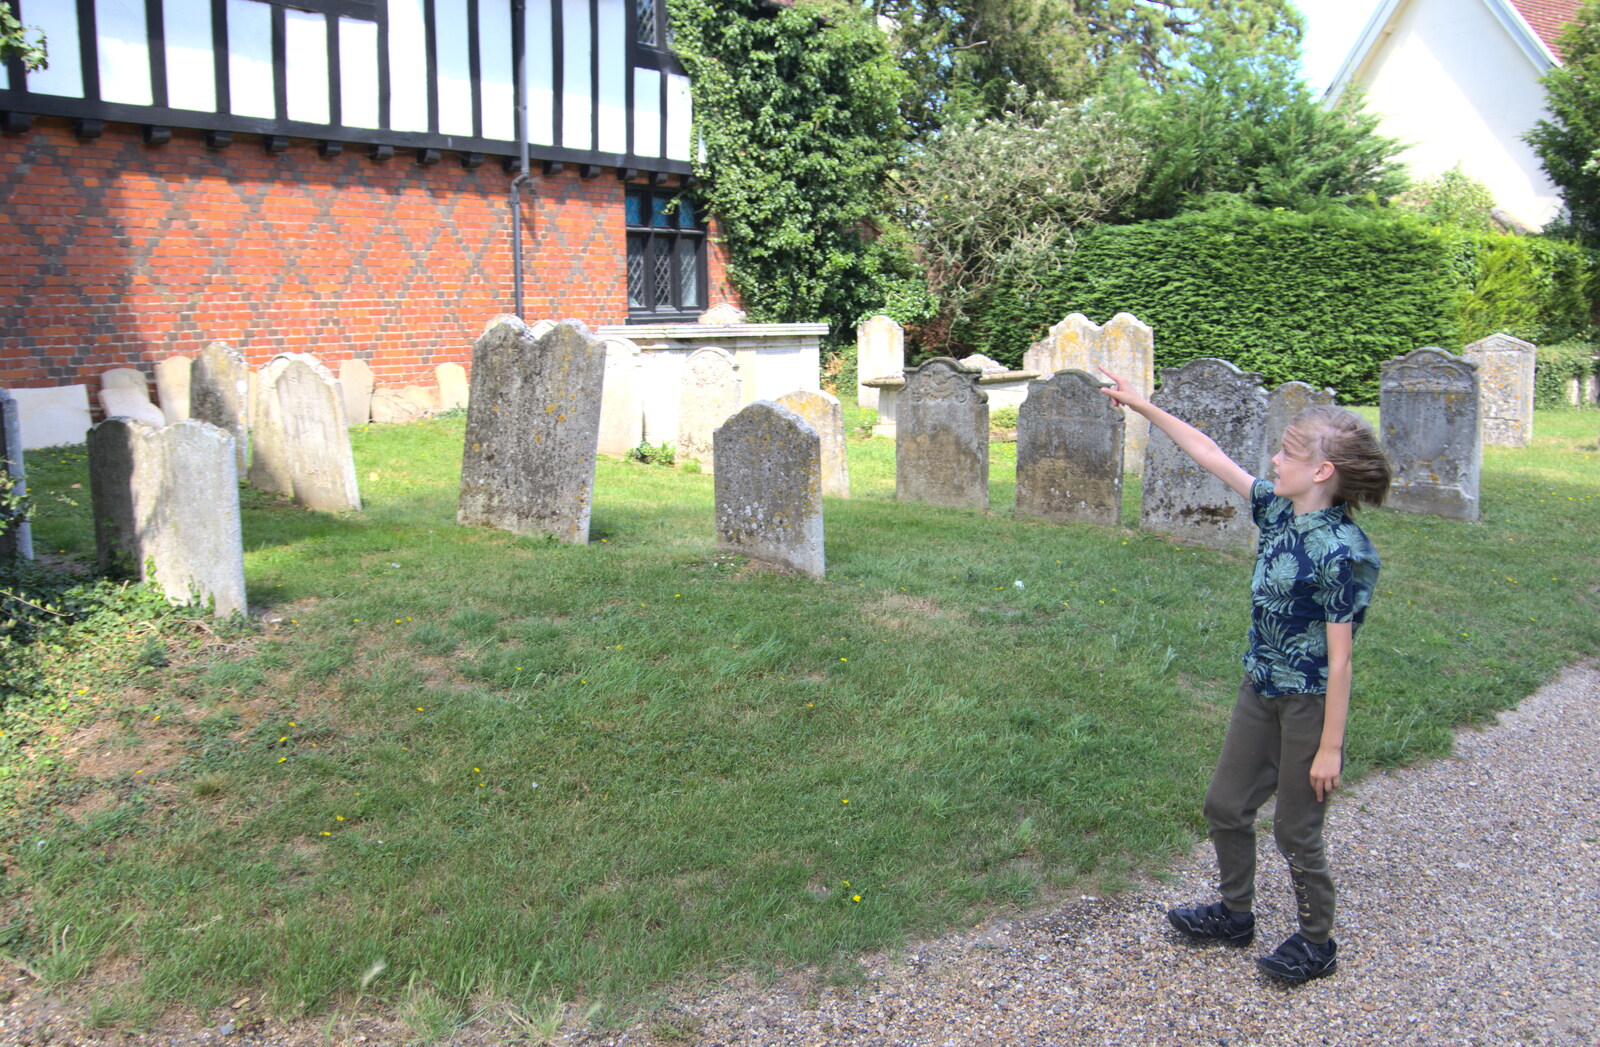 Harry points to his classroom from A Walk Around Abbey Bridges, Eye, Suffolk - 5th July 2020